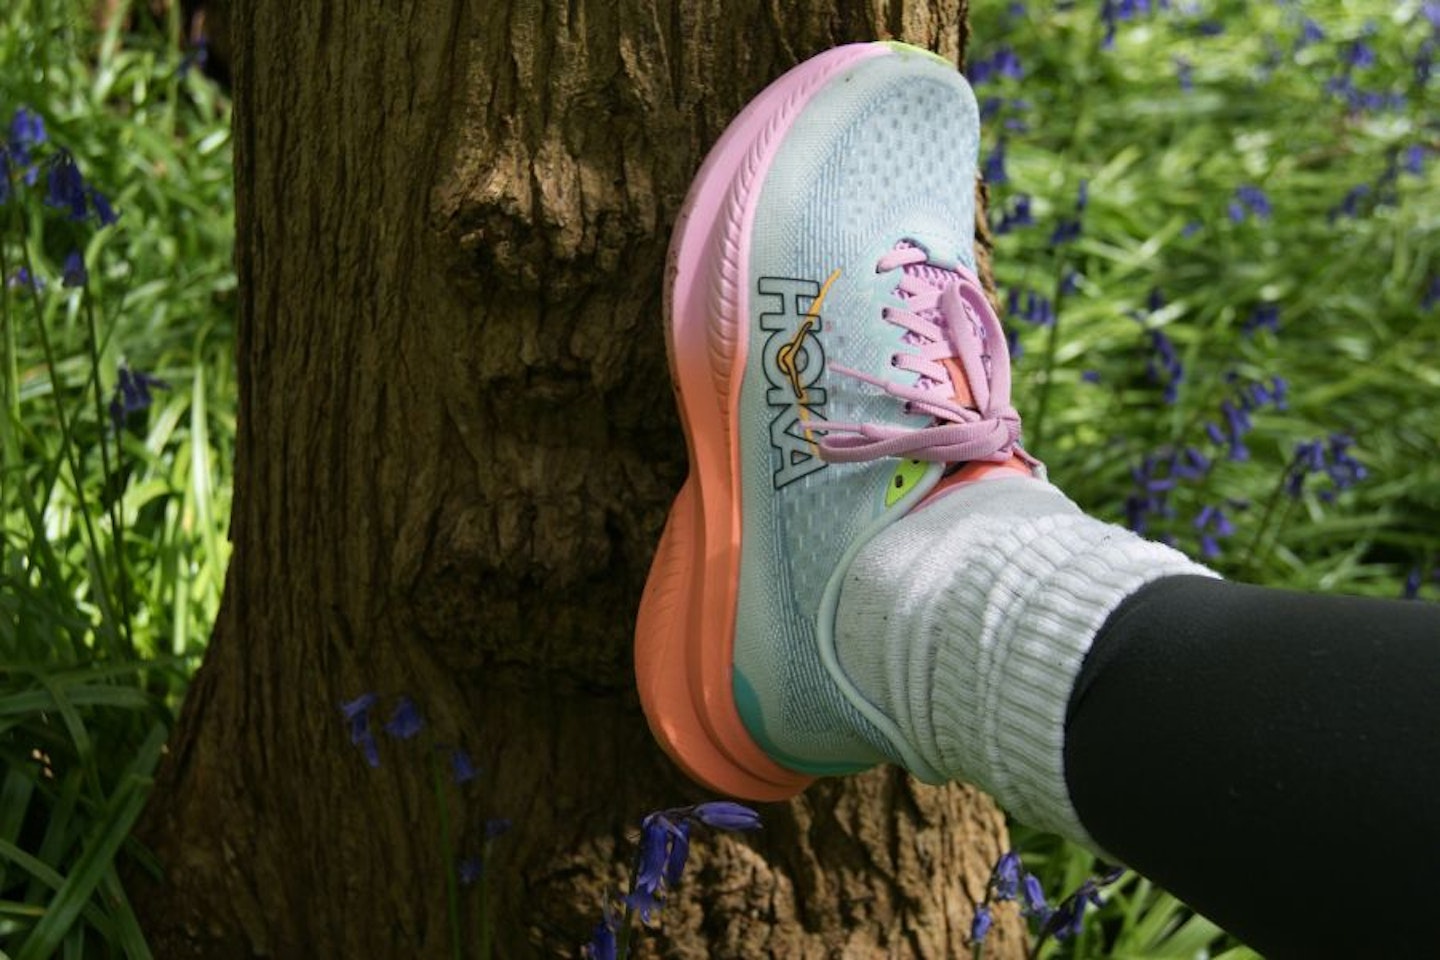 Hoka Mach 6 trainers against a tree in nature